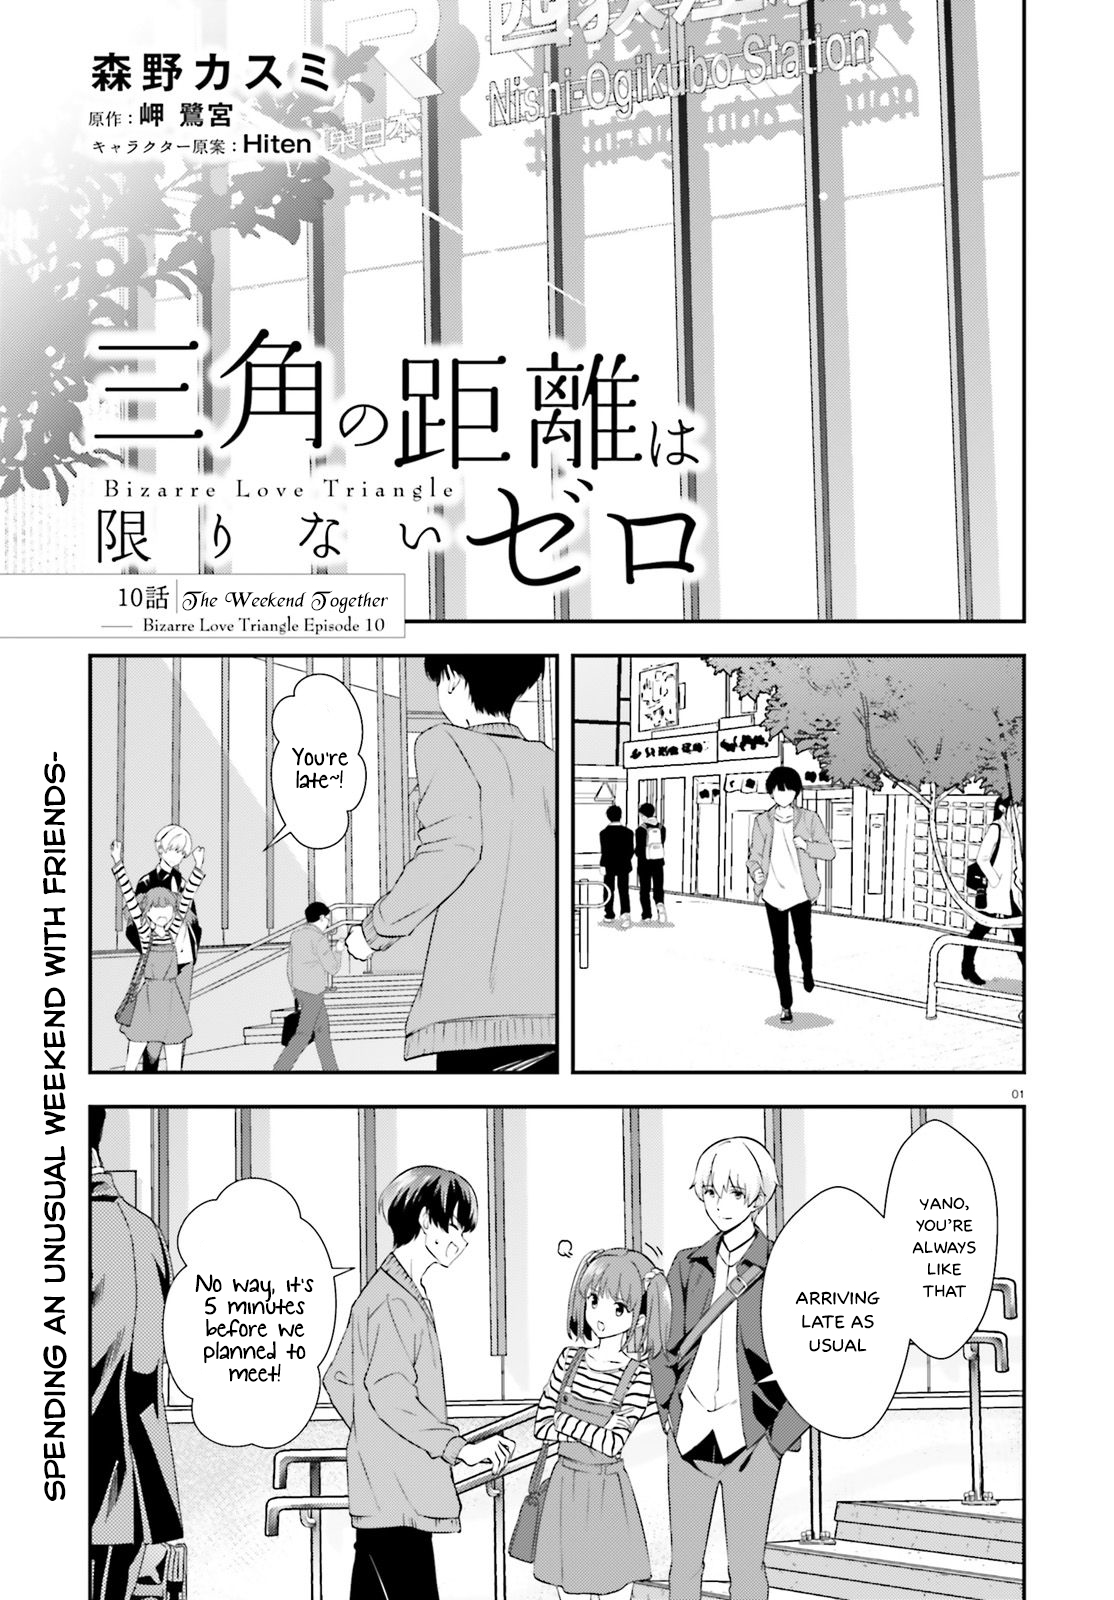 Bizarre Love Triangle Vol.2 Chapter 10: The Weekend Together - Picture 2